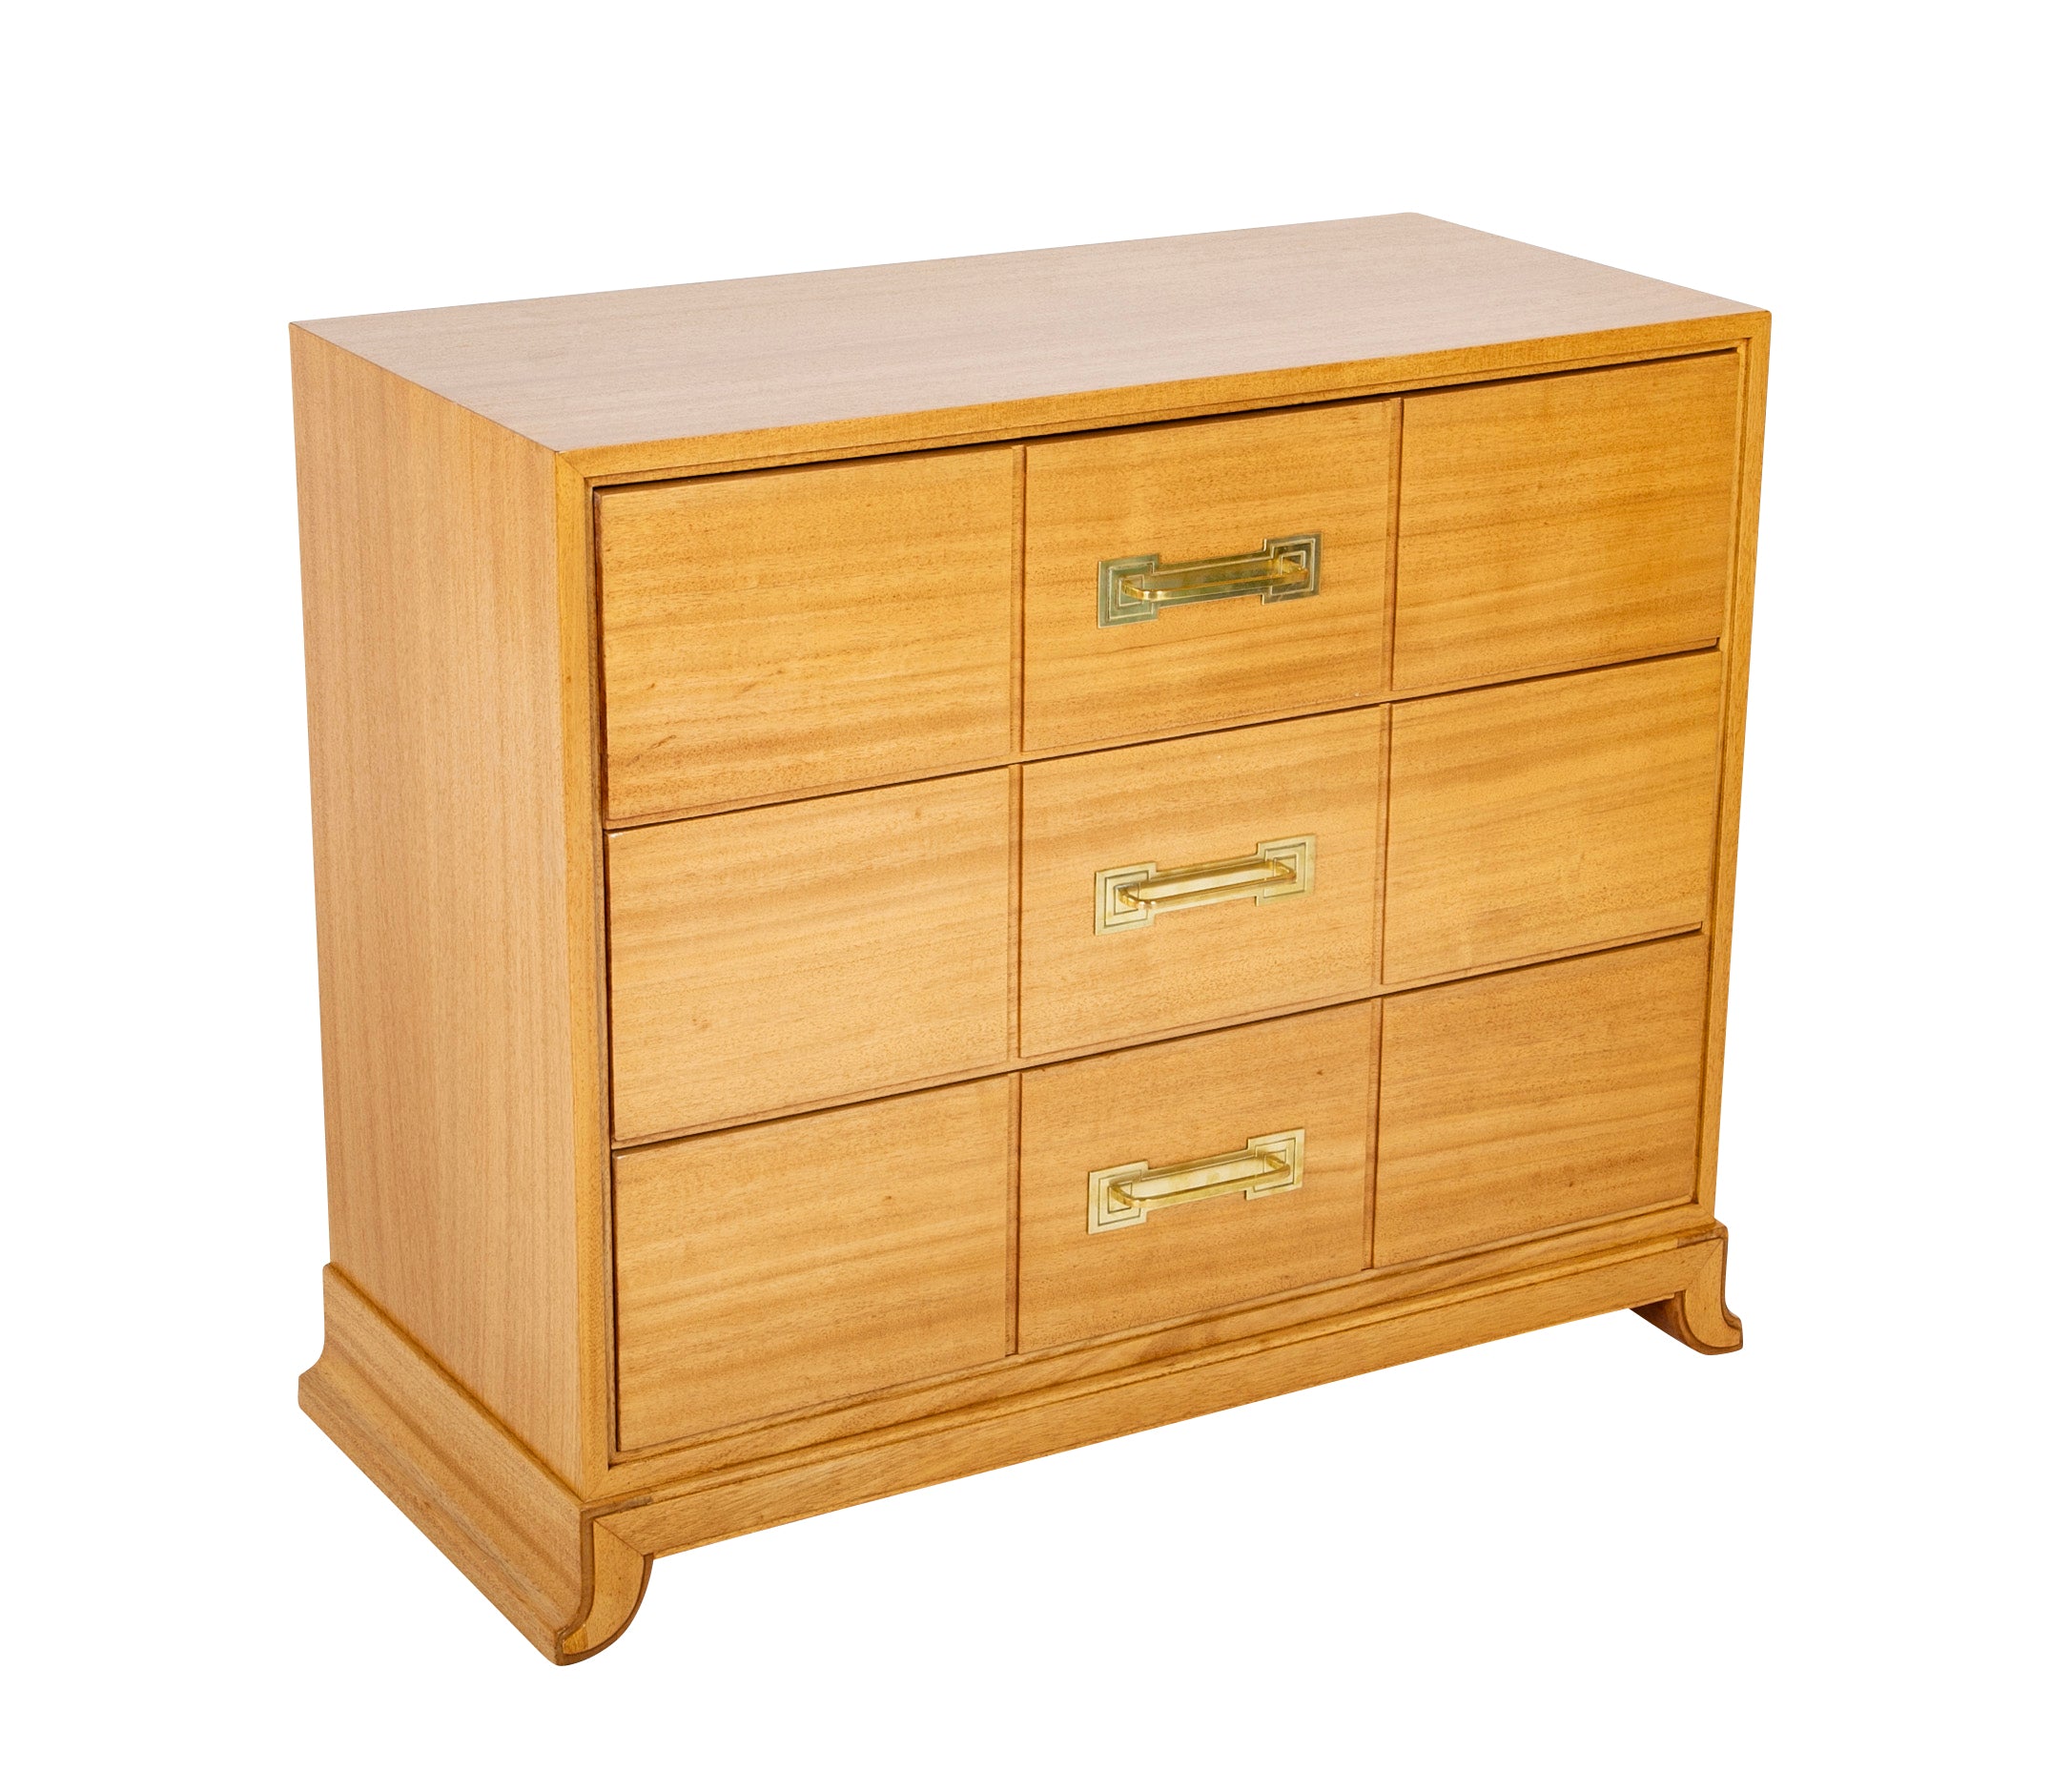 Tommi Parzinger for Charak Modern Bleached Mahogany Chest of Drawers